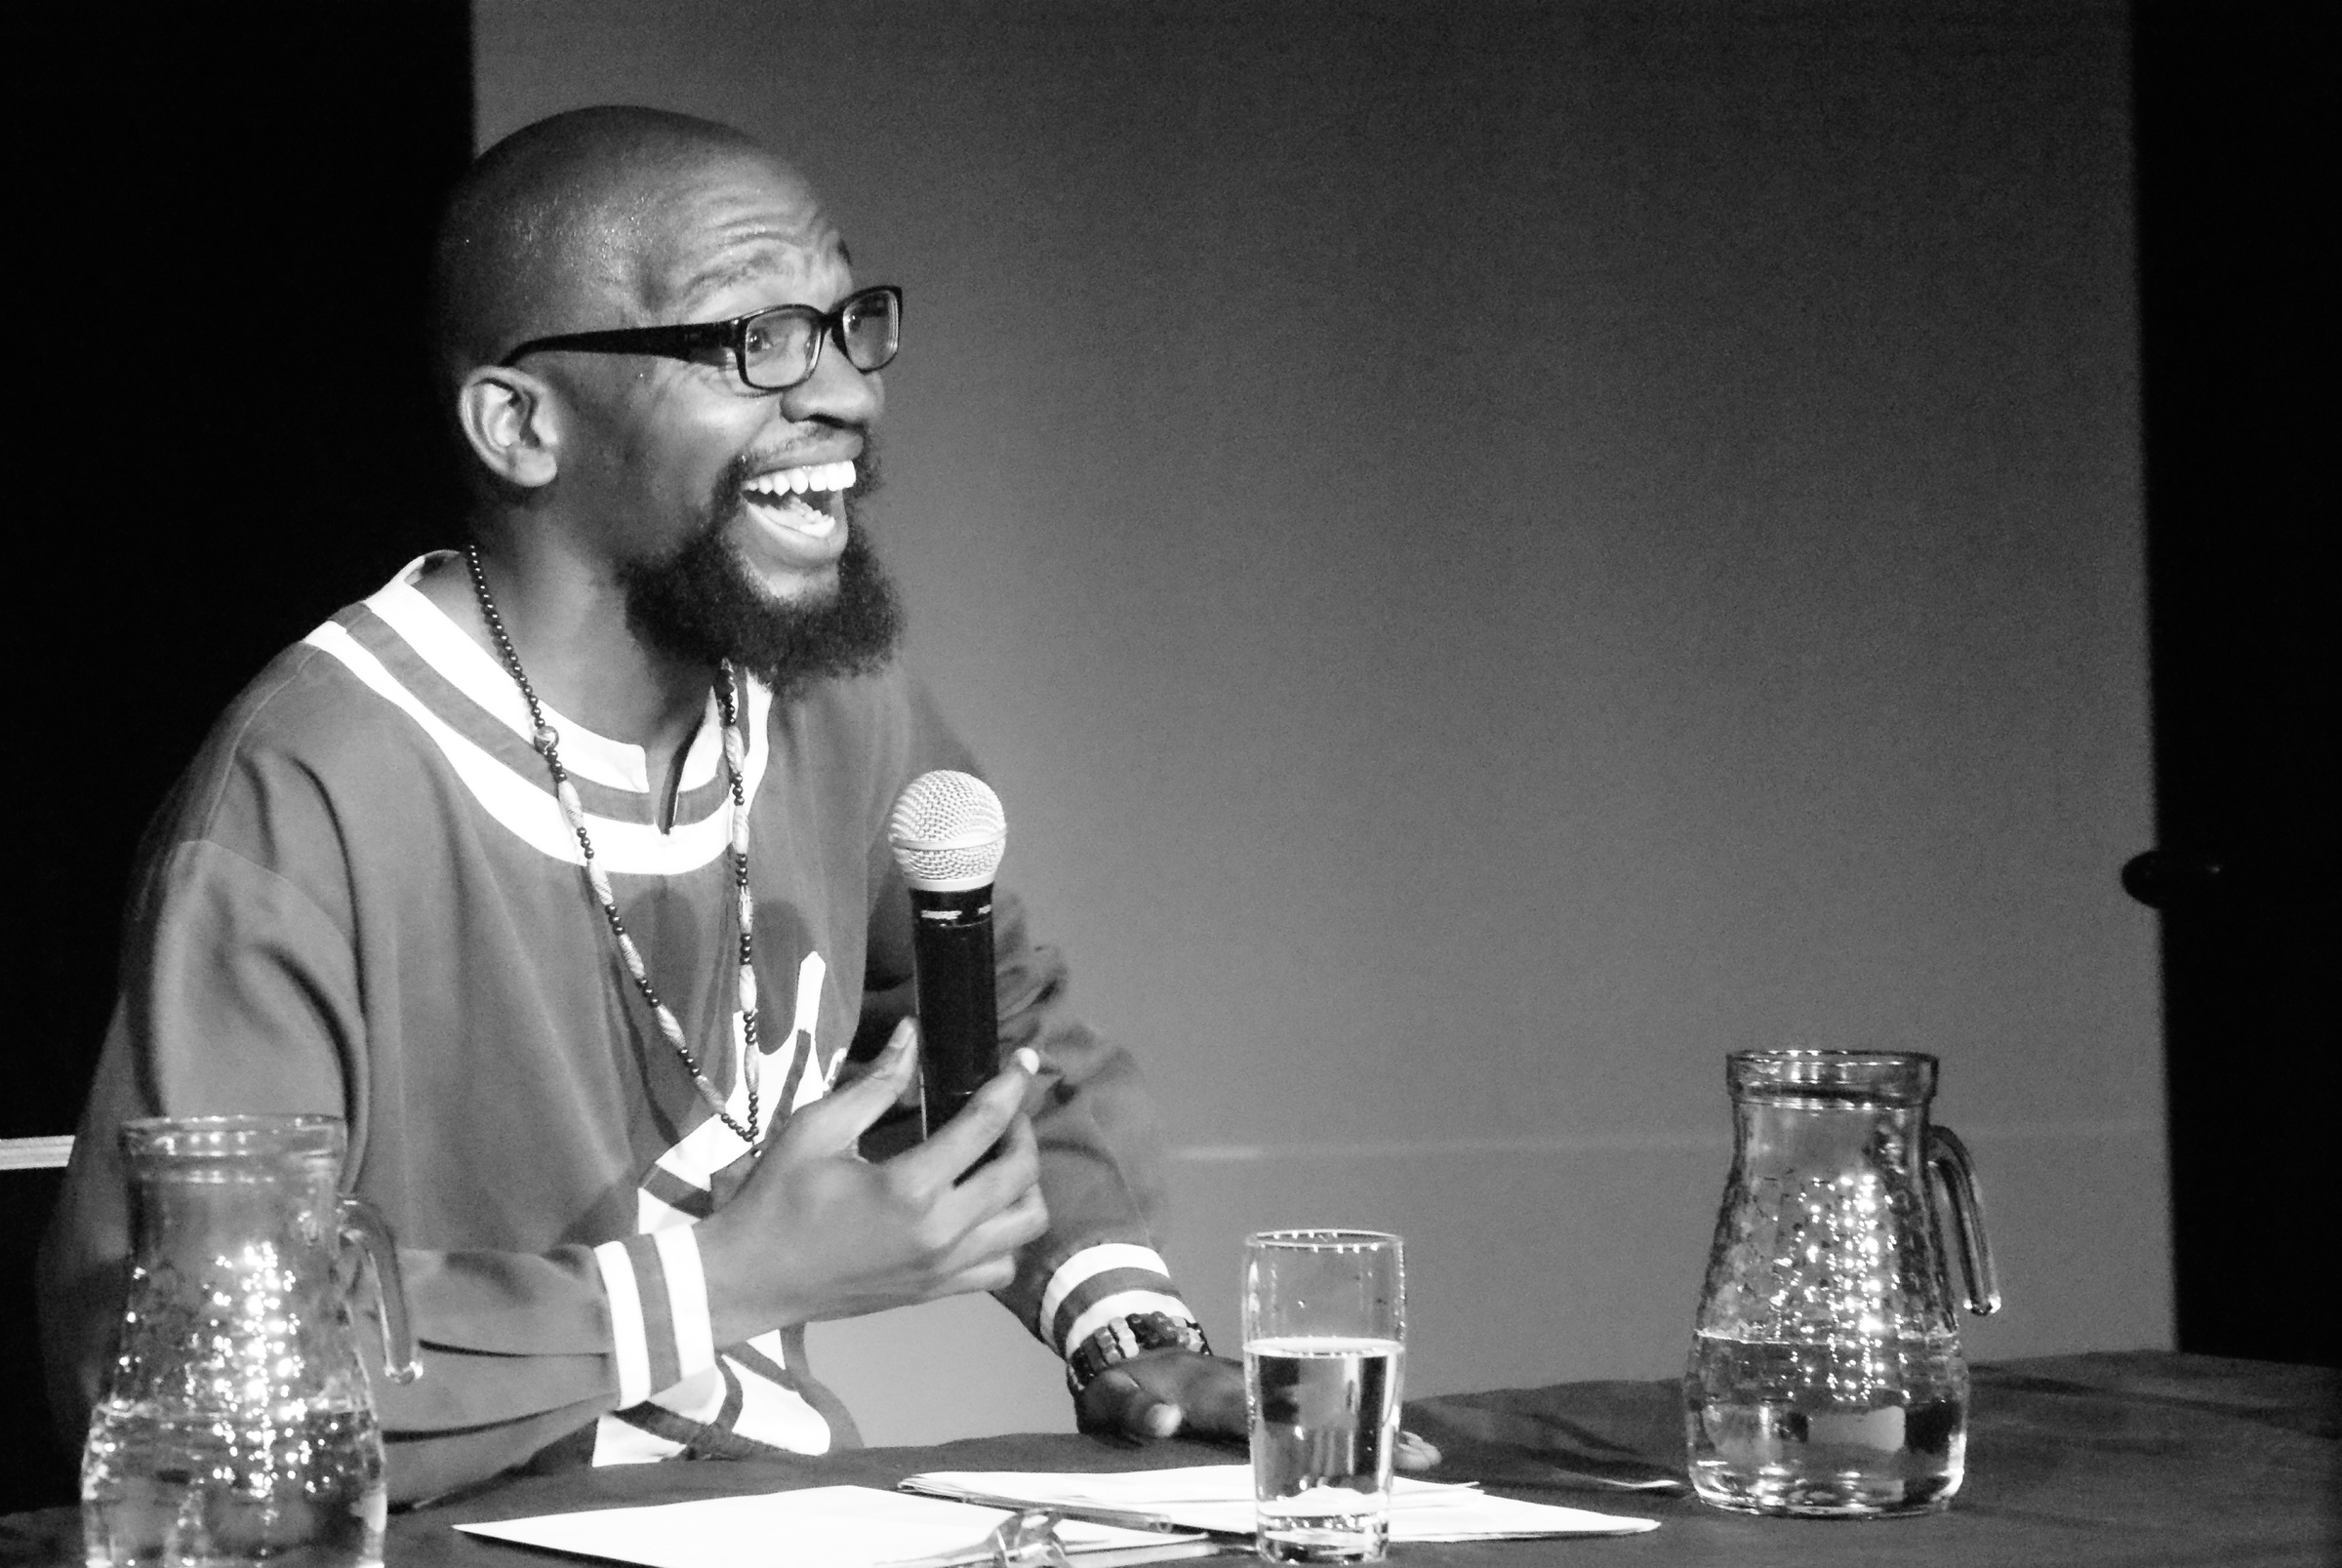 Monochrome event photograph from Jefferson Bobs Tshabalala’s residency on A4’s top floor that shows the artist seated at a table with a microphone.
